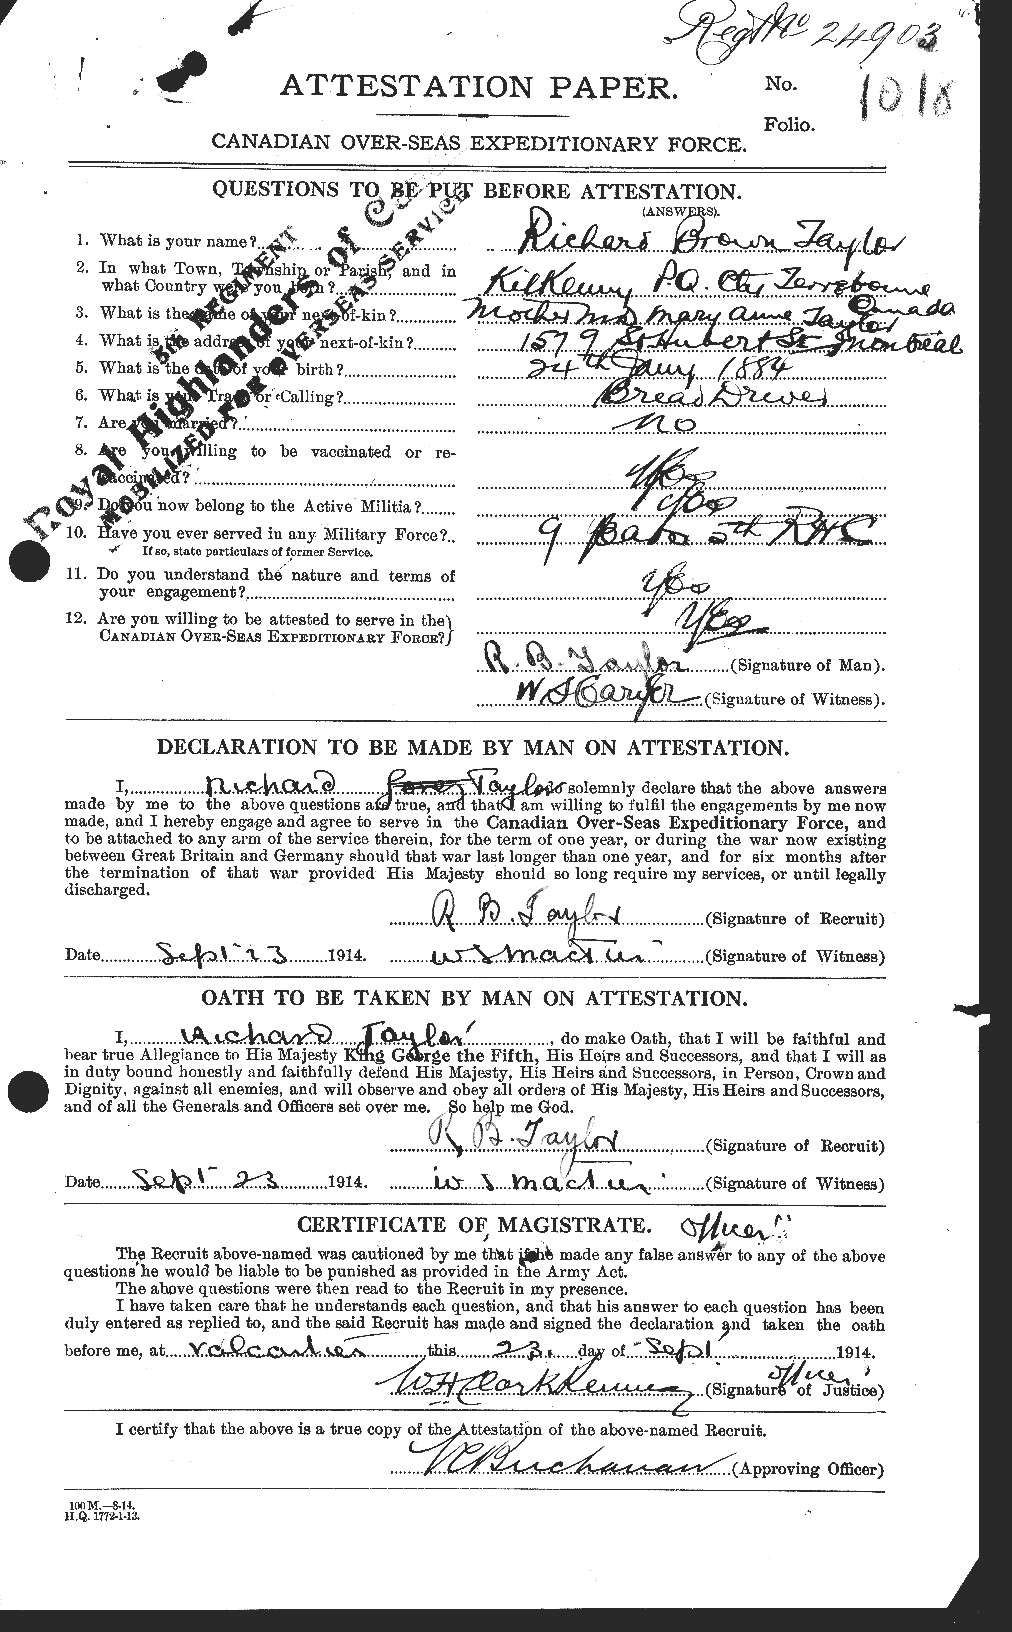 Personnel Records of the First World War - CEF 627824a